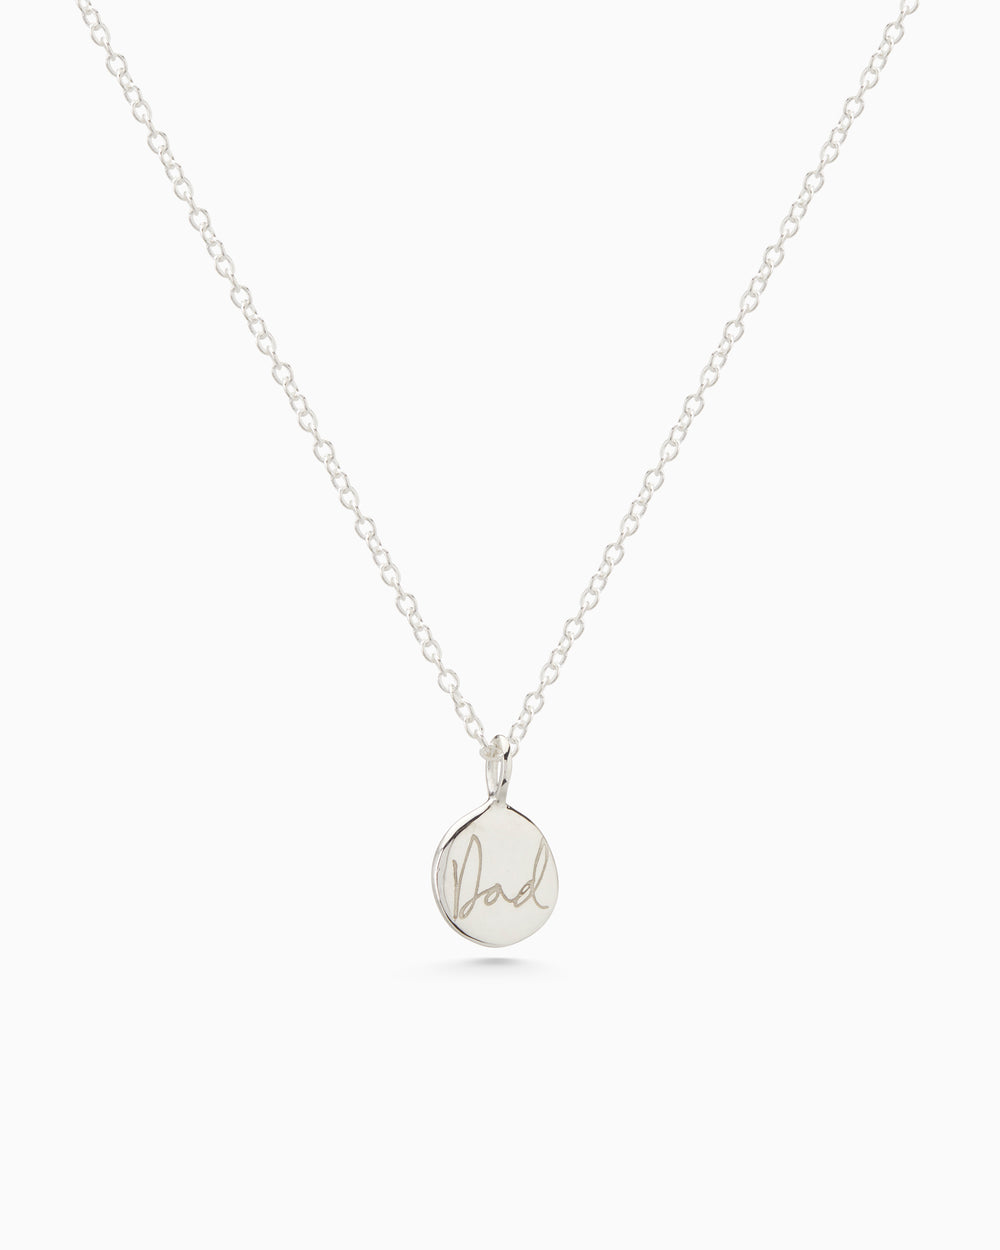 Custom Engraved Necklace | White Gold